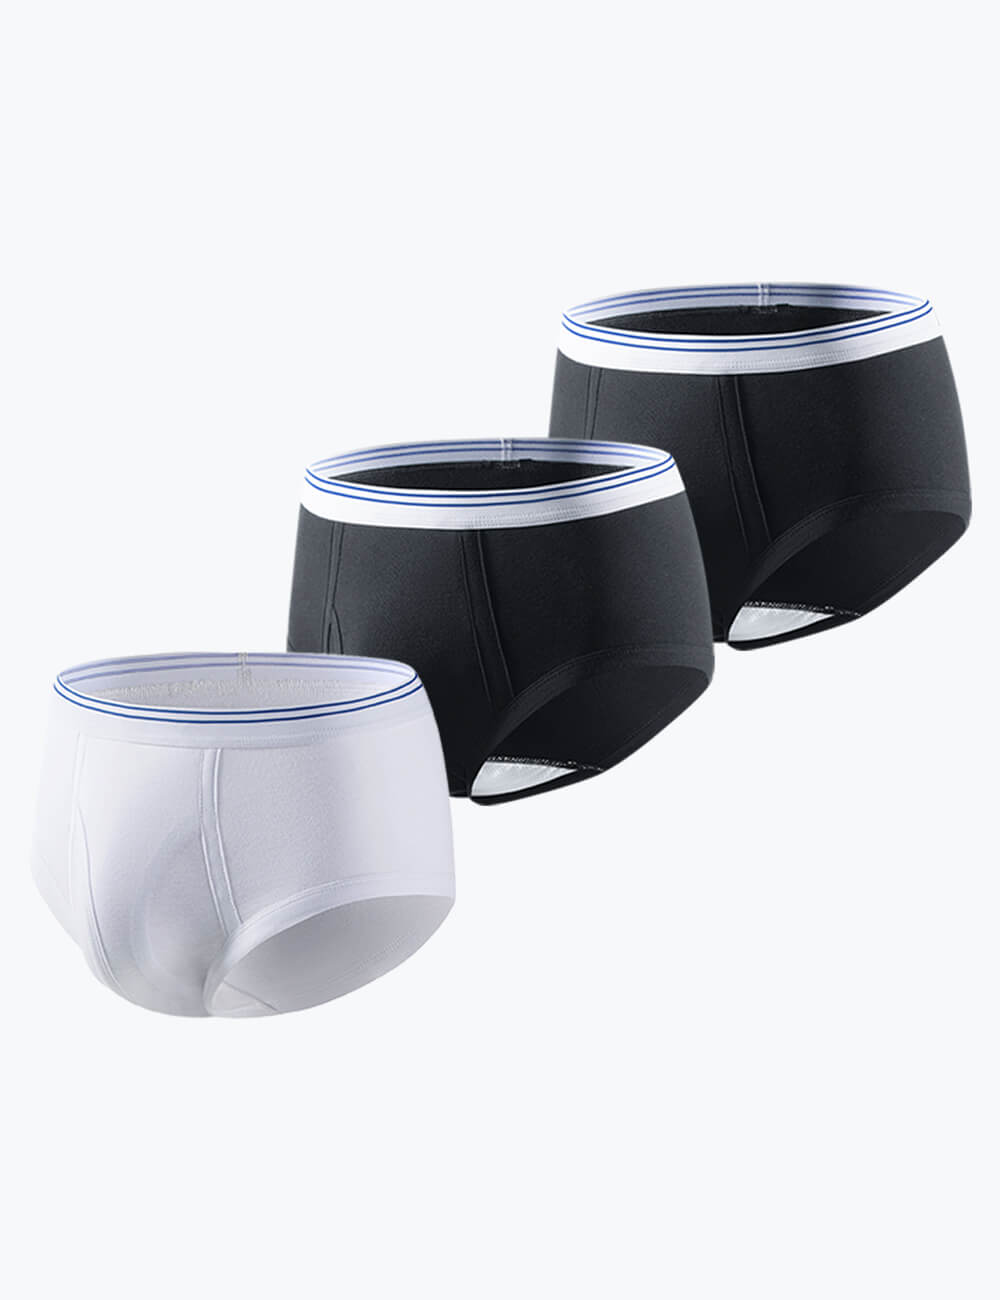 Men's Resuable Waterproof Briefs with Fly for Moderate Incontinence ...